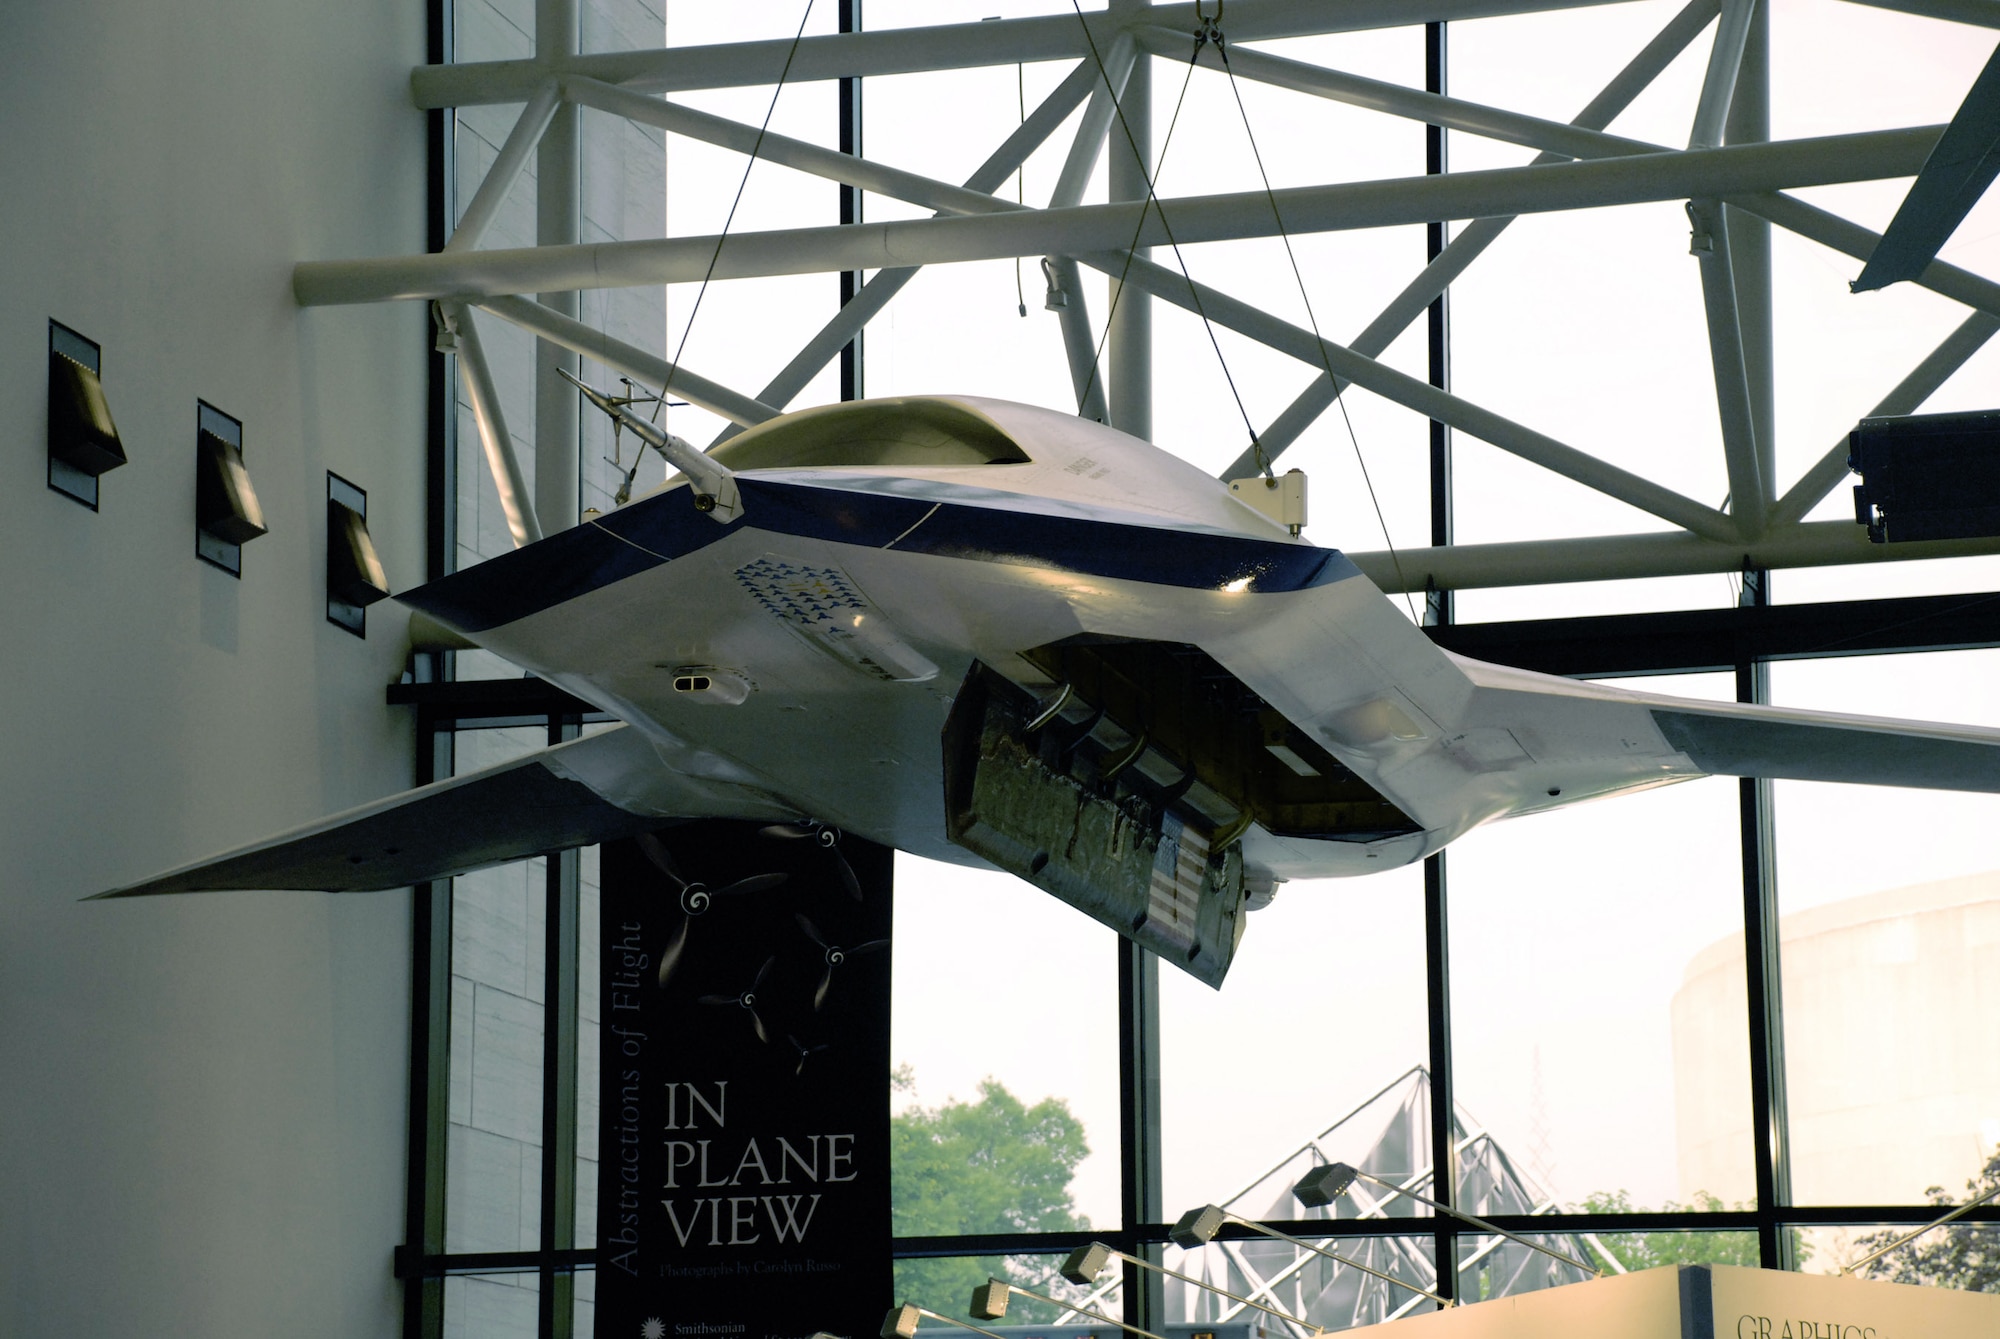 An X-45A Joint Unmanned Combat Air System hangs in the Smithsonian Institution's National Air and Space Museum in a new exhibit of military unmanned aerial vehicles. The exhibit, which opened to the public April 24, includes six UAVs from all four services and will be on display for the next 10 years. The X-45A was the first UAV designed specifically for combat missions. (U.S. Air Force photo/Staff Sgt. J.G. Buzanowski) 